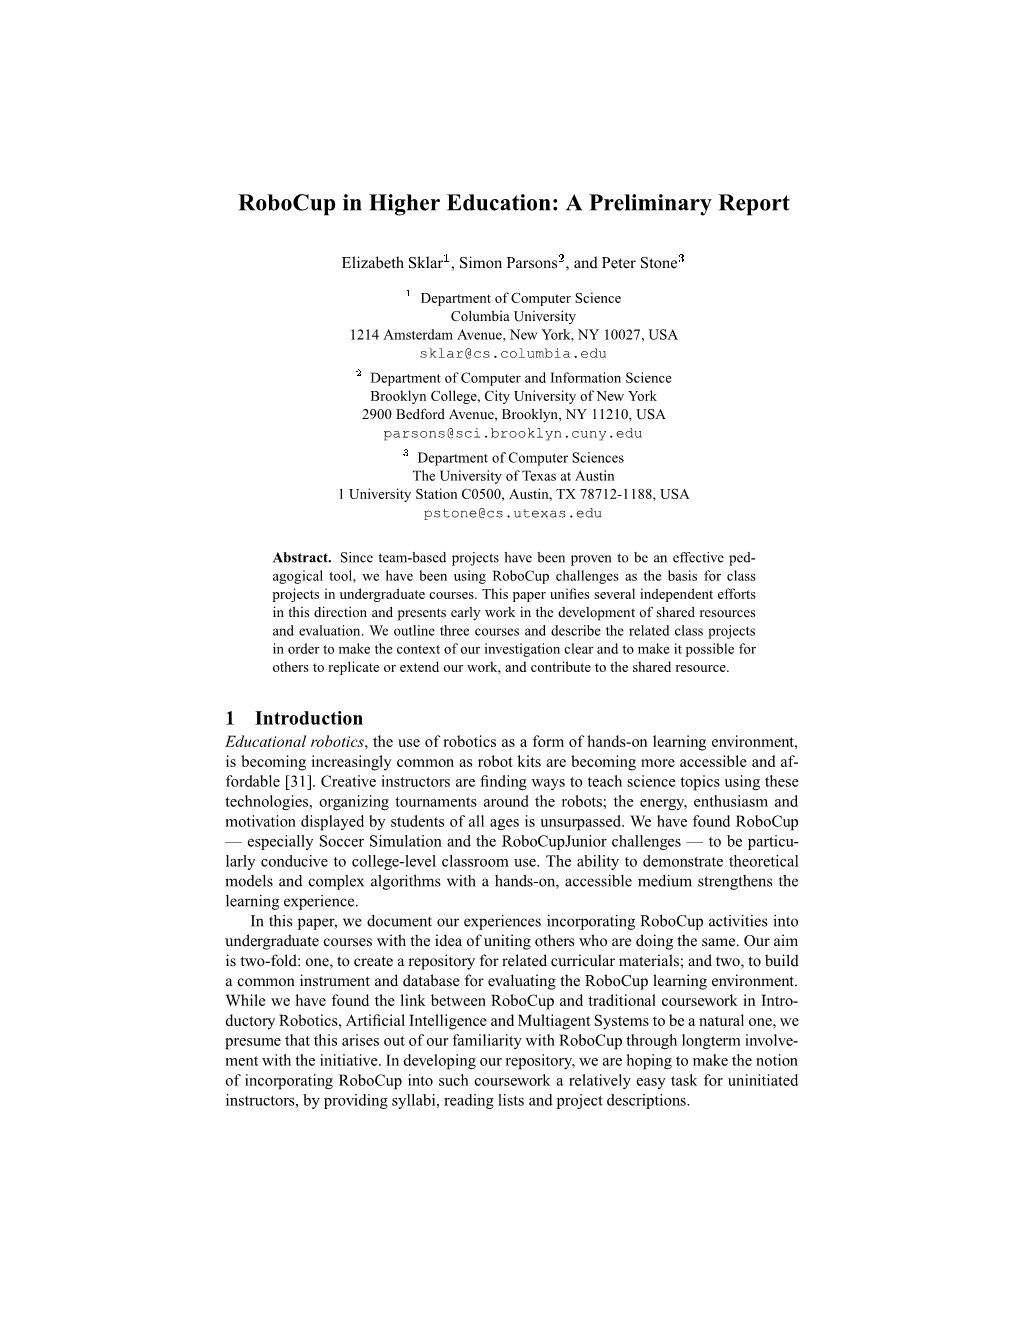 Robocup in Higher Education: a Preliminary Report